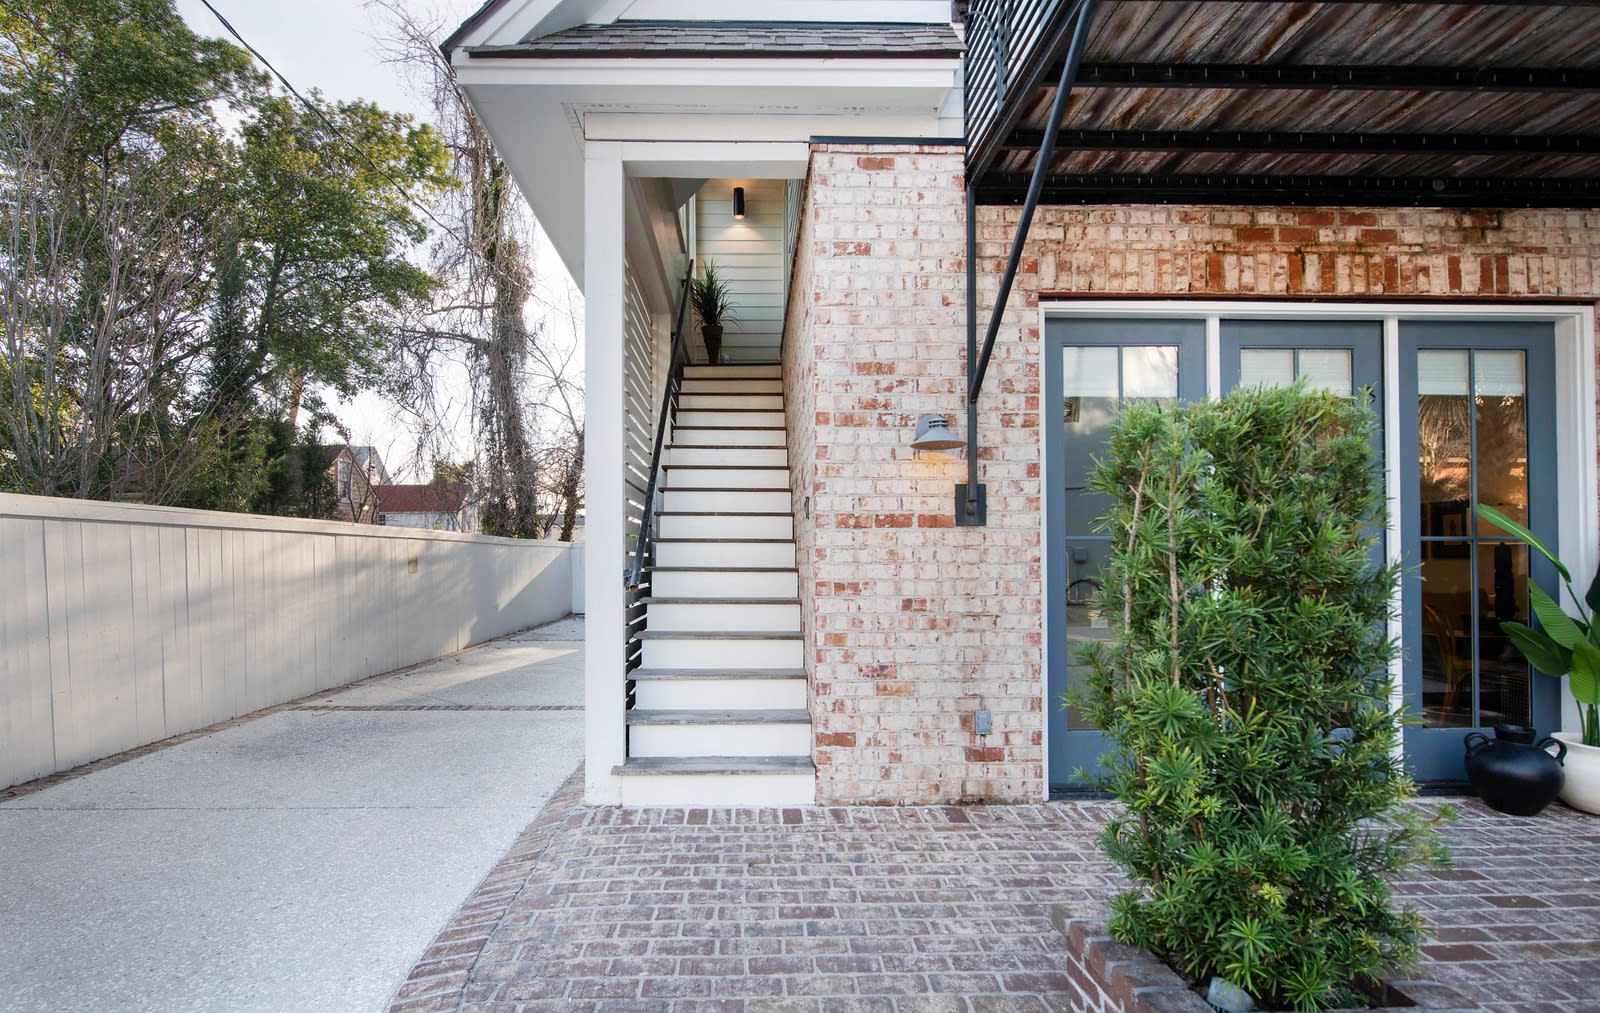 Walk up the exterior staircase to the upstairs loft of the back house!